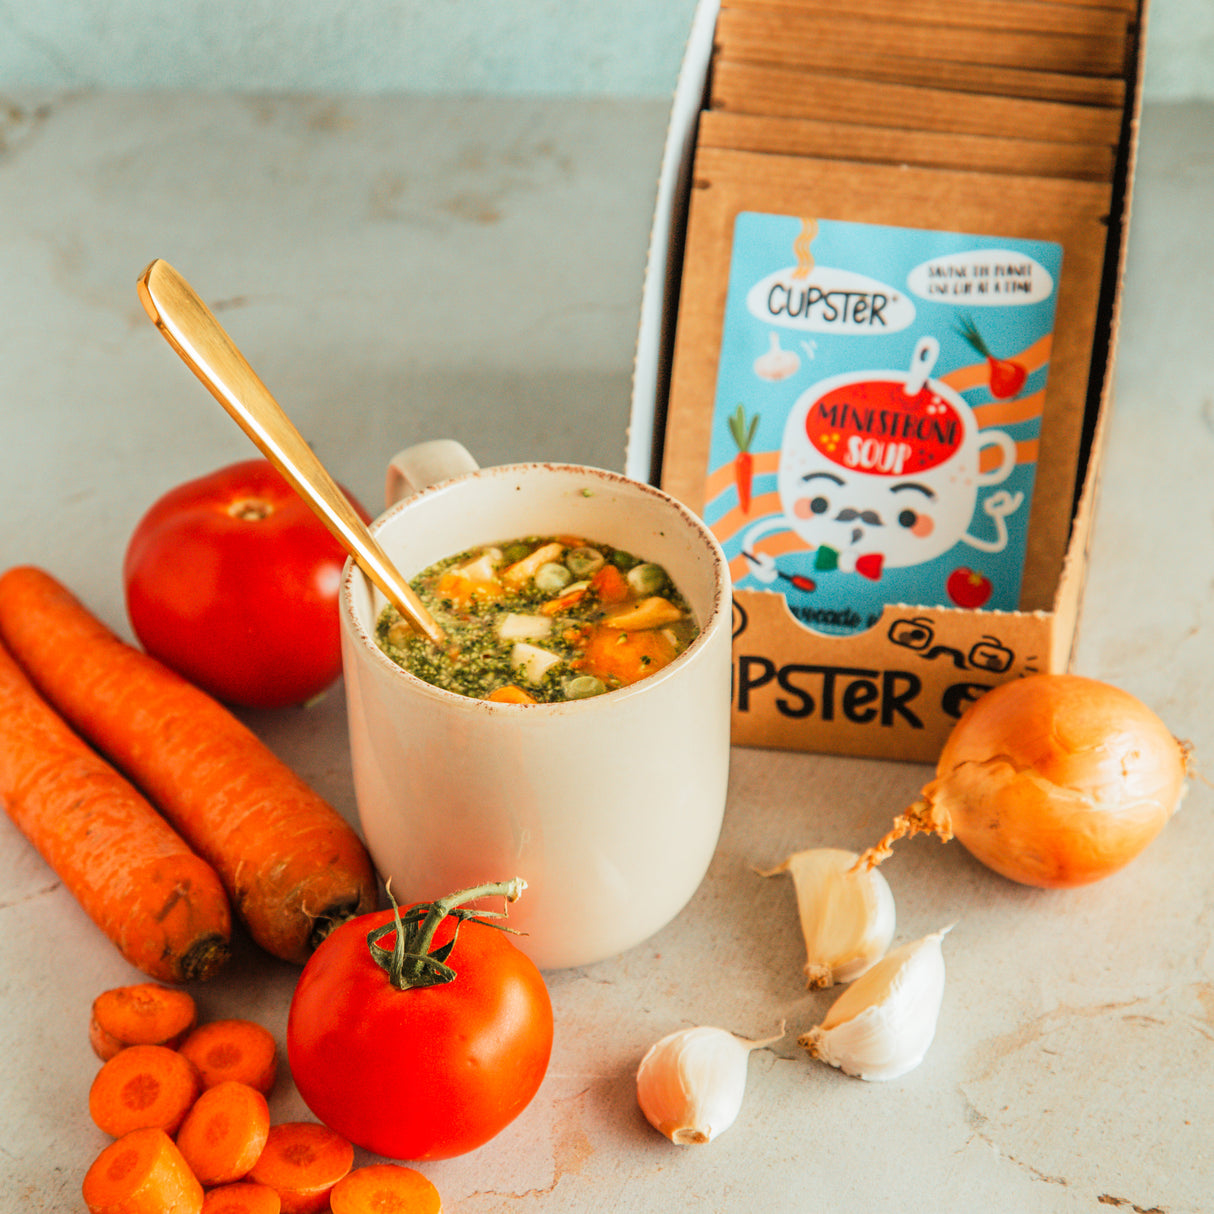 Cupster instant minestrone juha 22g